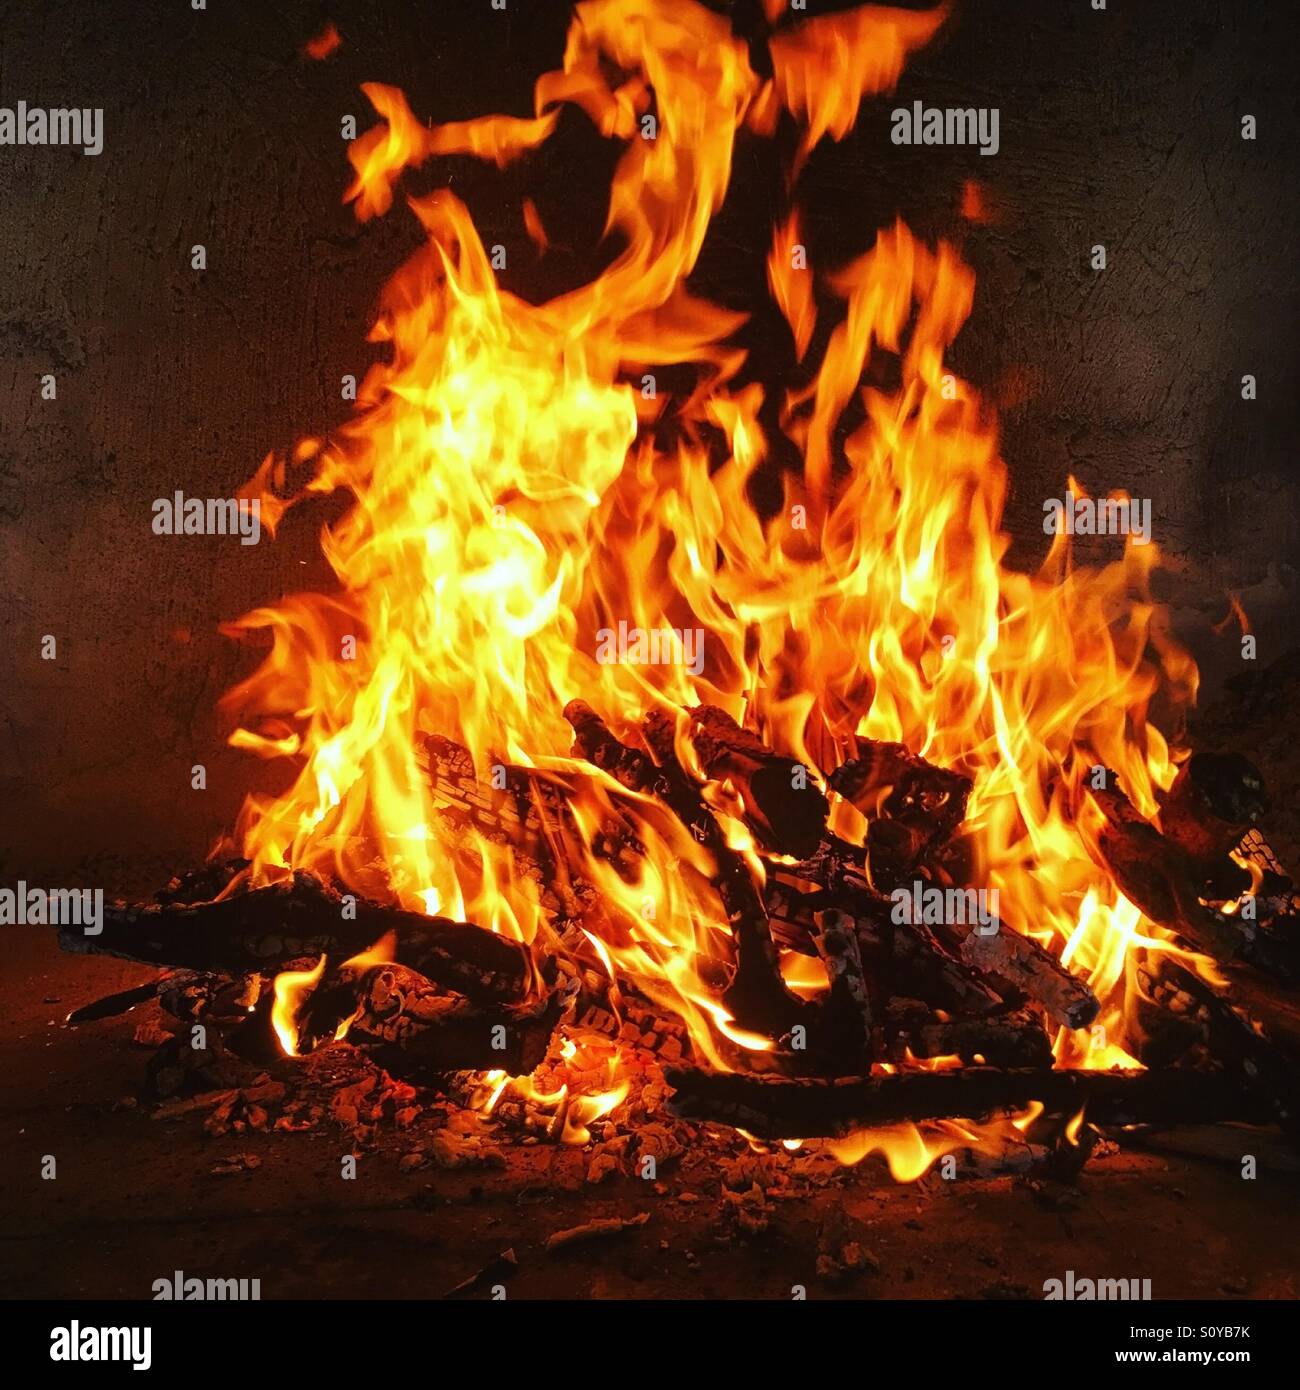 Fire burning in fireplace Stock Photo